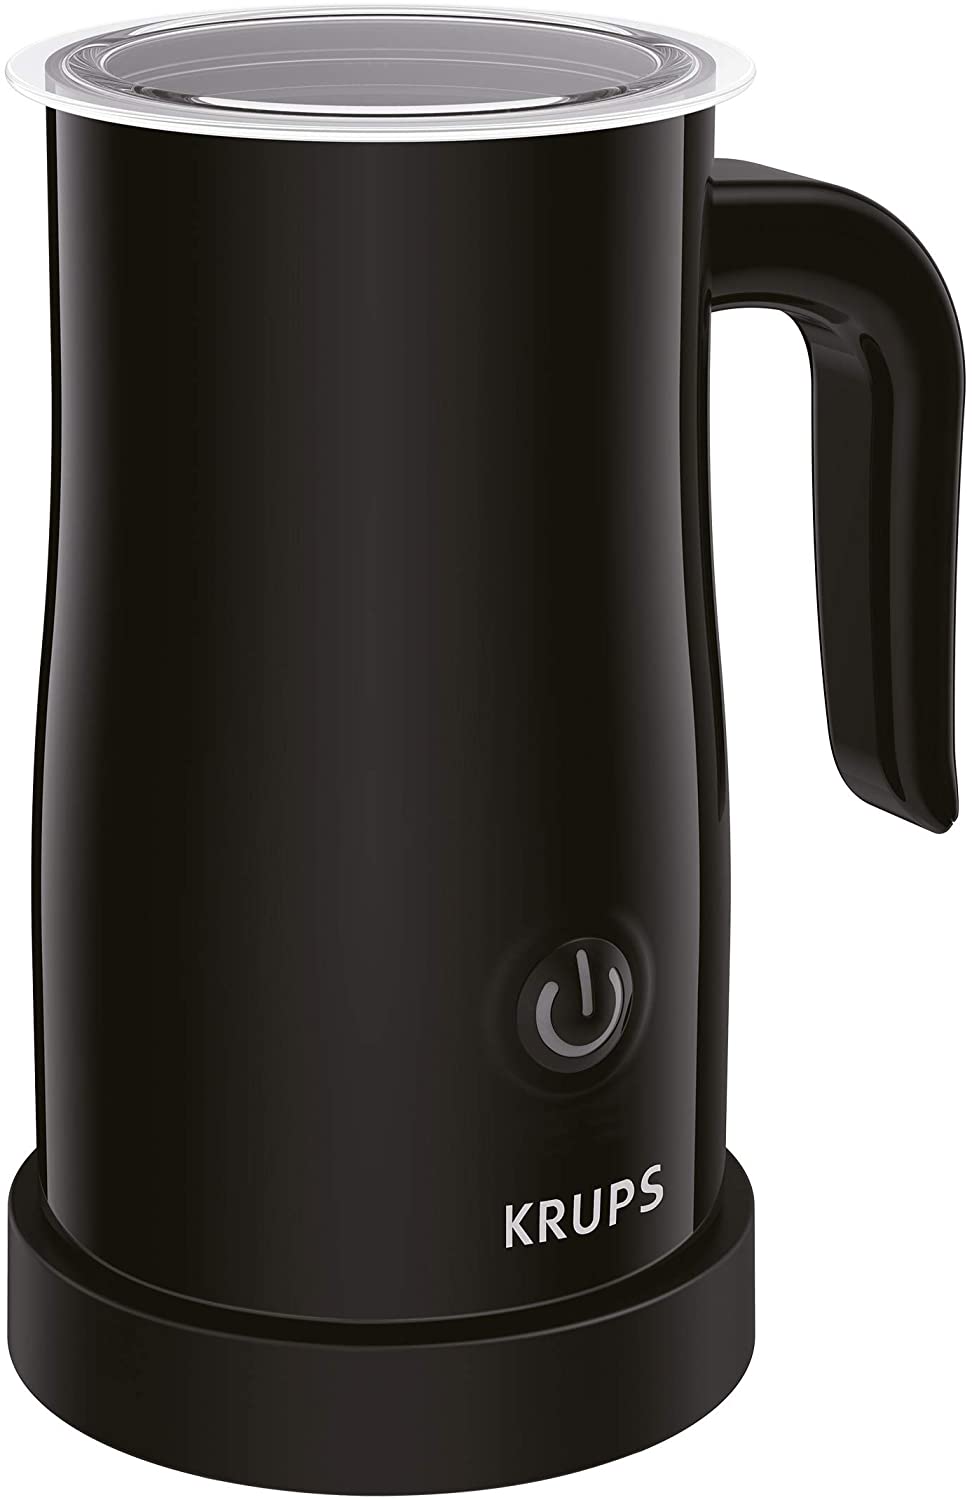 Krups XL1008 Electric Milk Frother | Up to 150 ml Frothing Capacity | Easy Operation at the Touch of a Button | 360 Degree Rotating Base | Automatic Shut-Off | Black